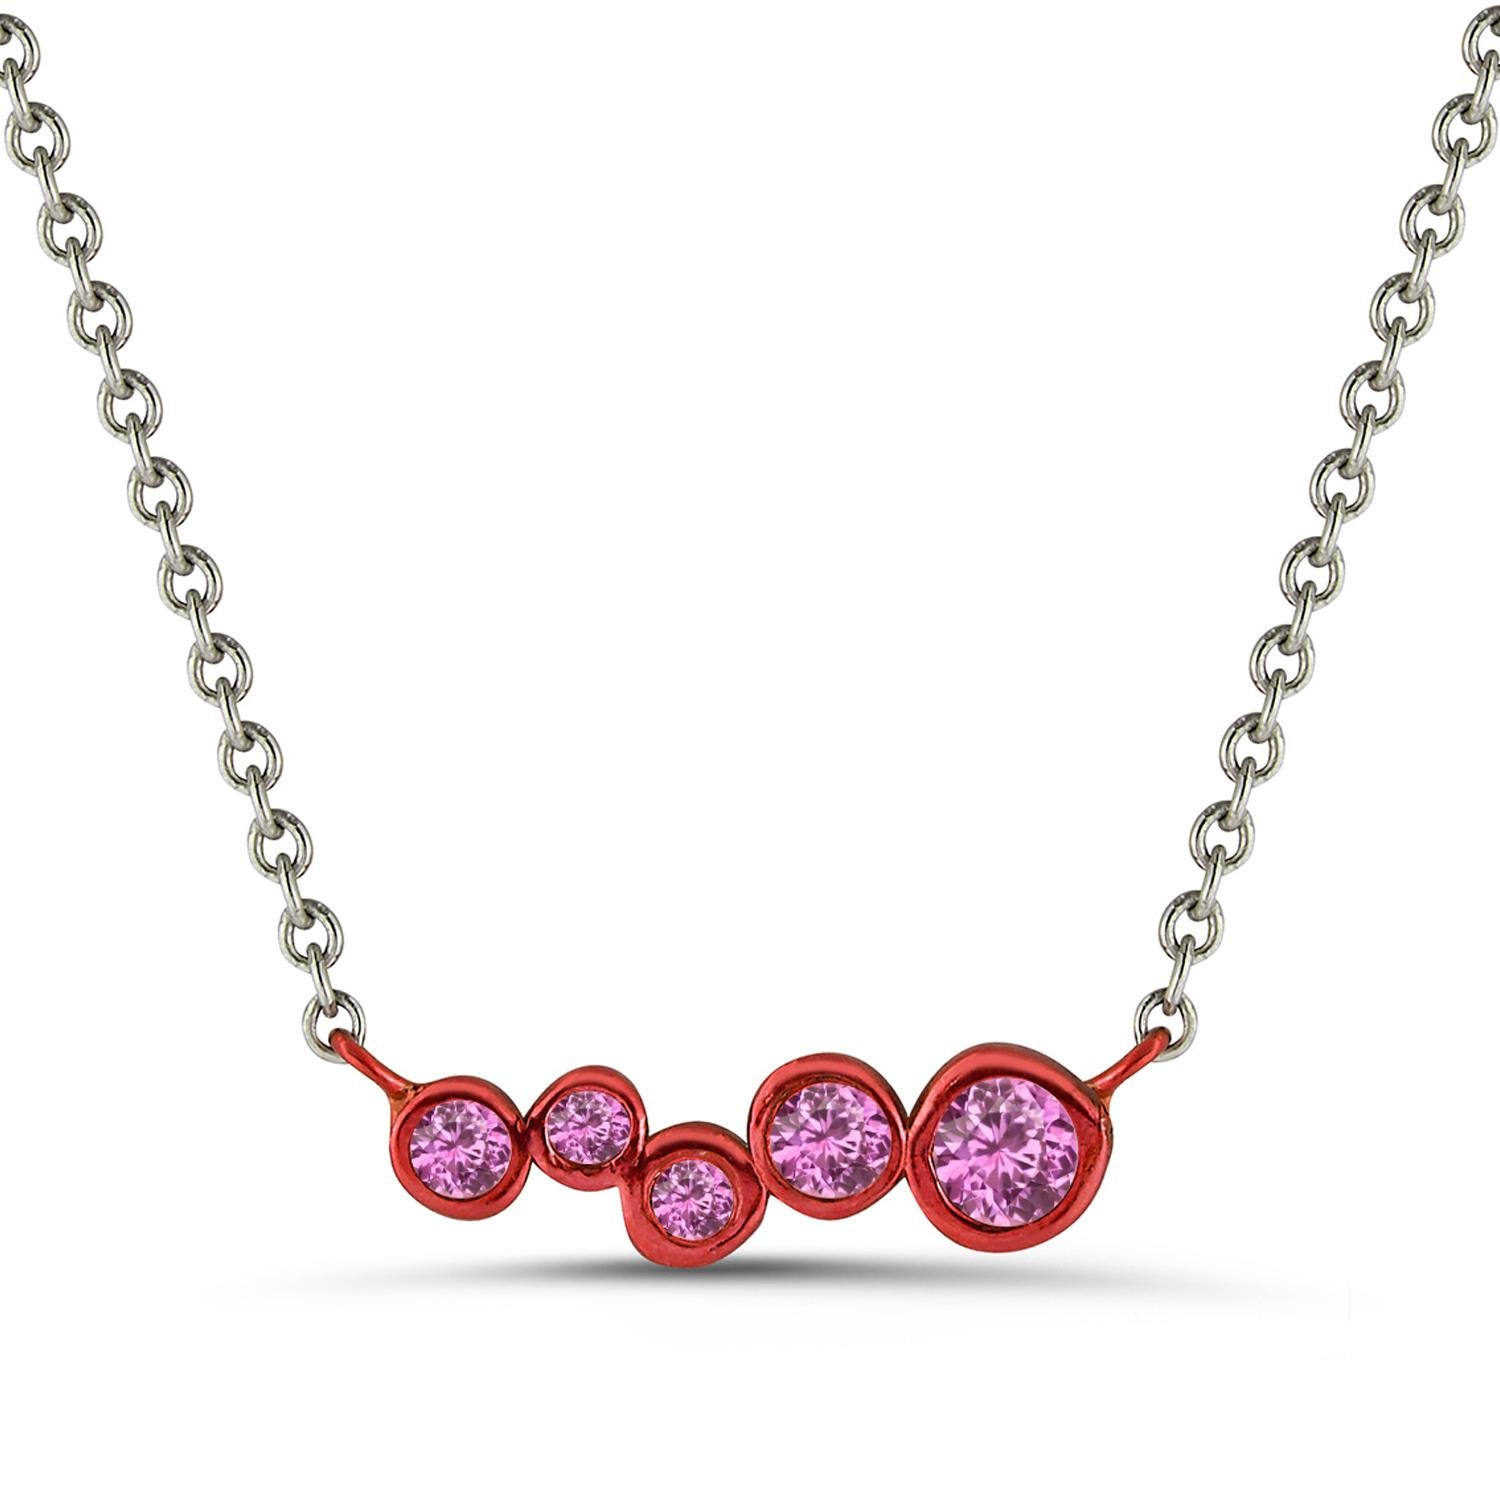 Hi June Parker's version of the classic bar pendant sprinkled with tapering sizes of Pink Sapphires ceramic plated with Bright Red to add a pop of electric color to your neck.

Inspired by seeing the cross-section view of life, as if slicing a tree